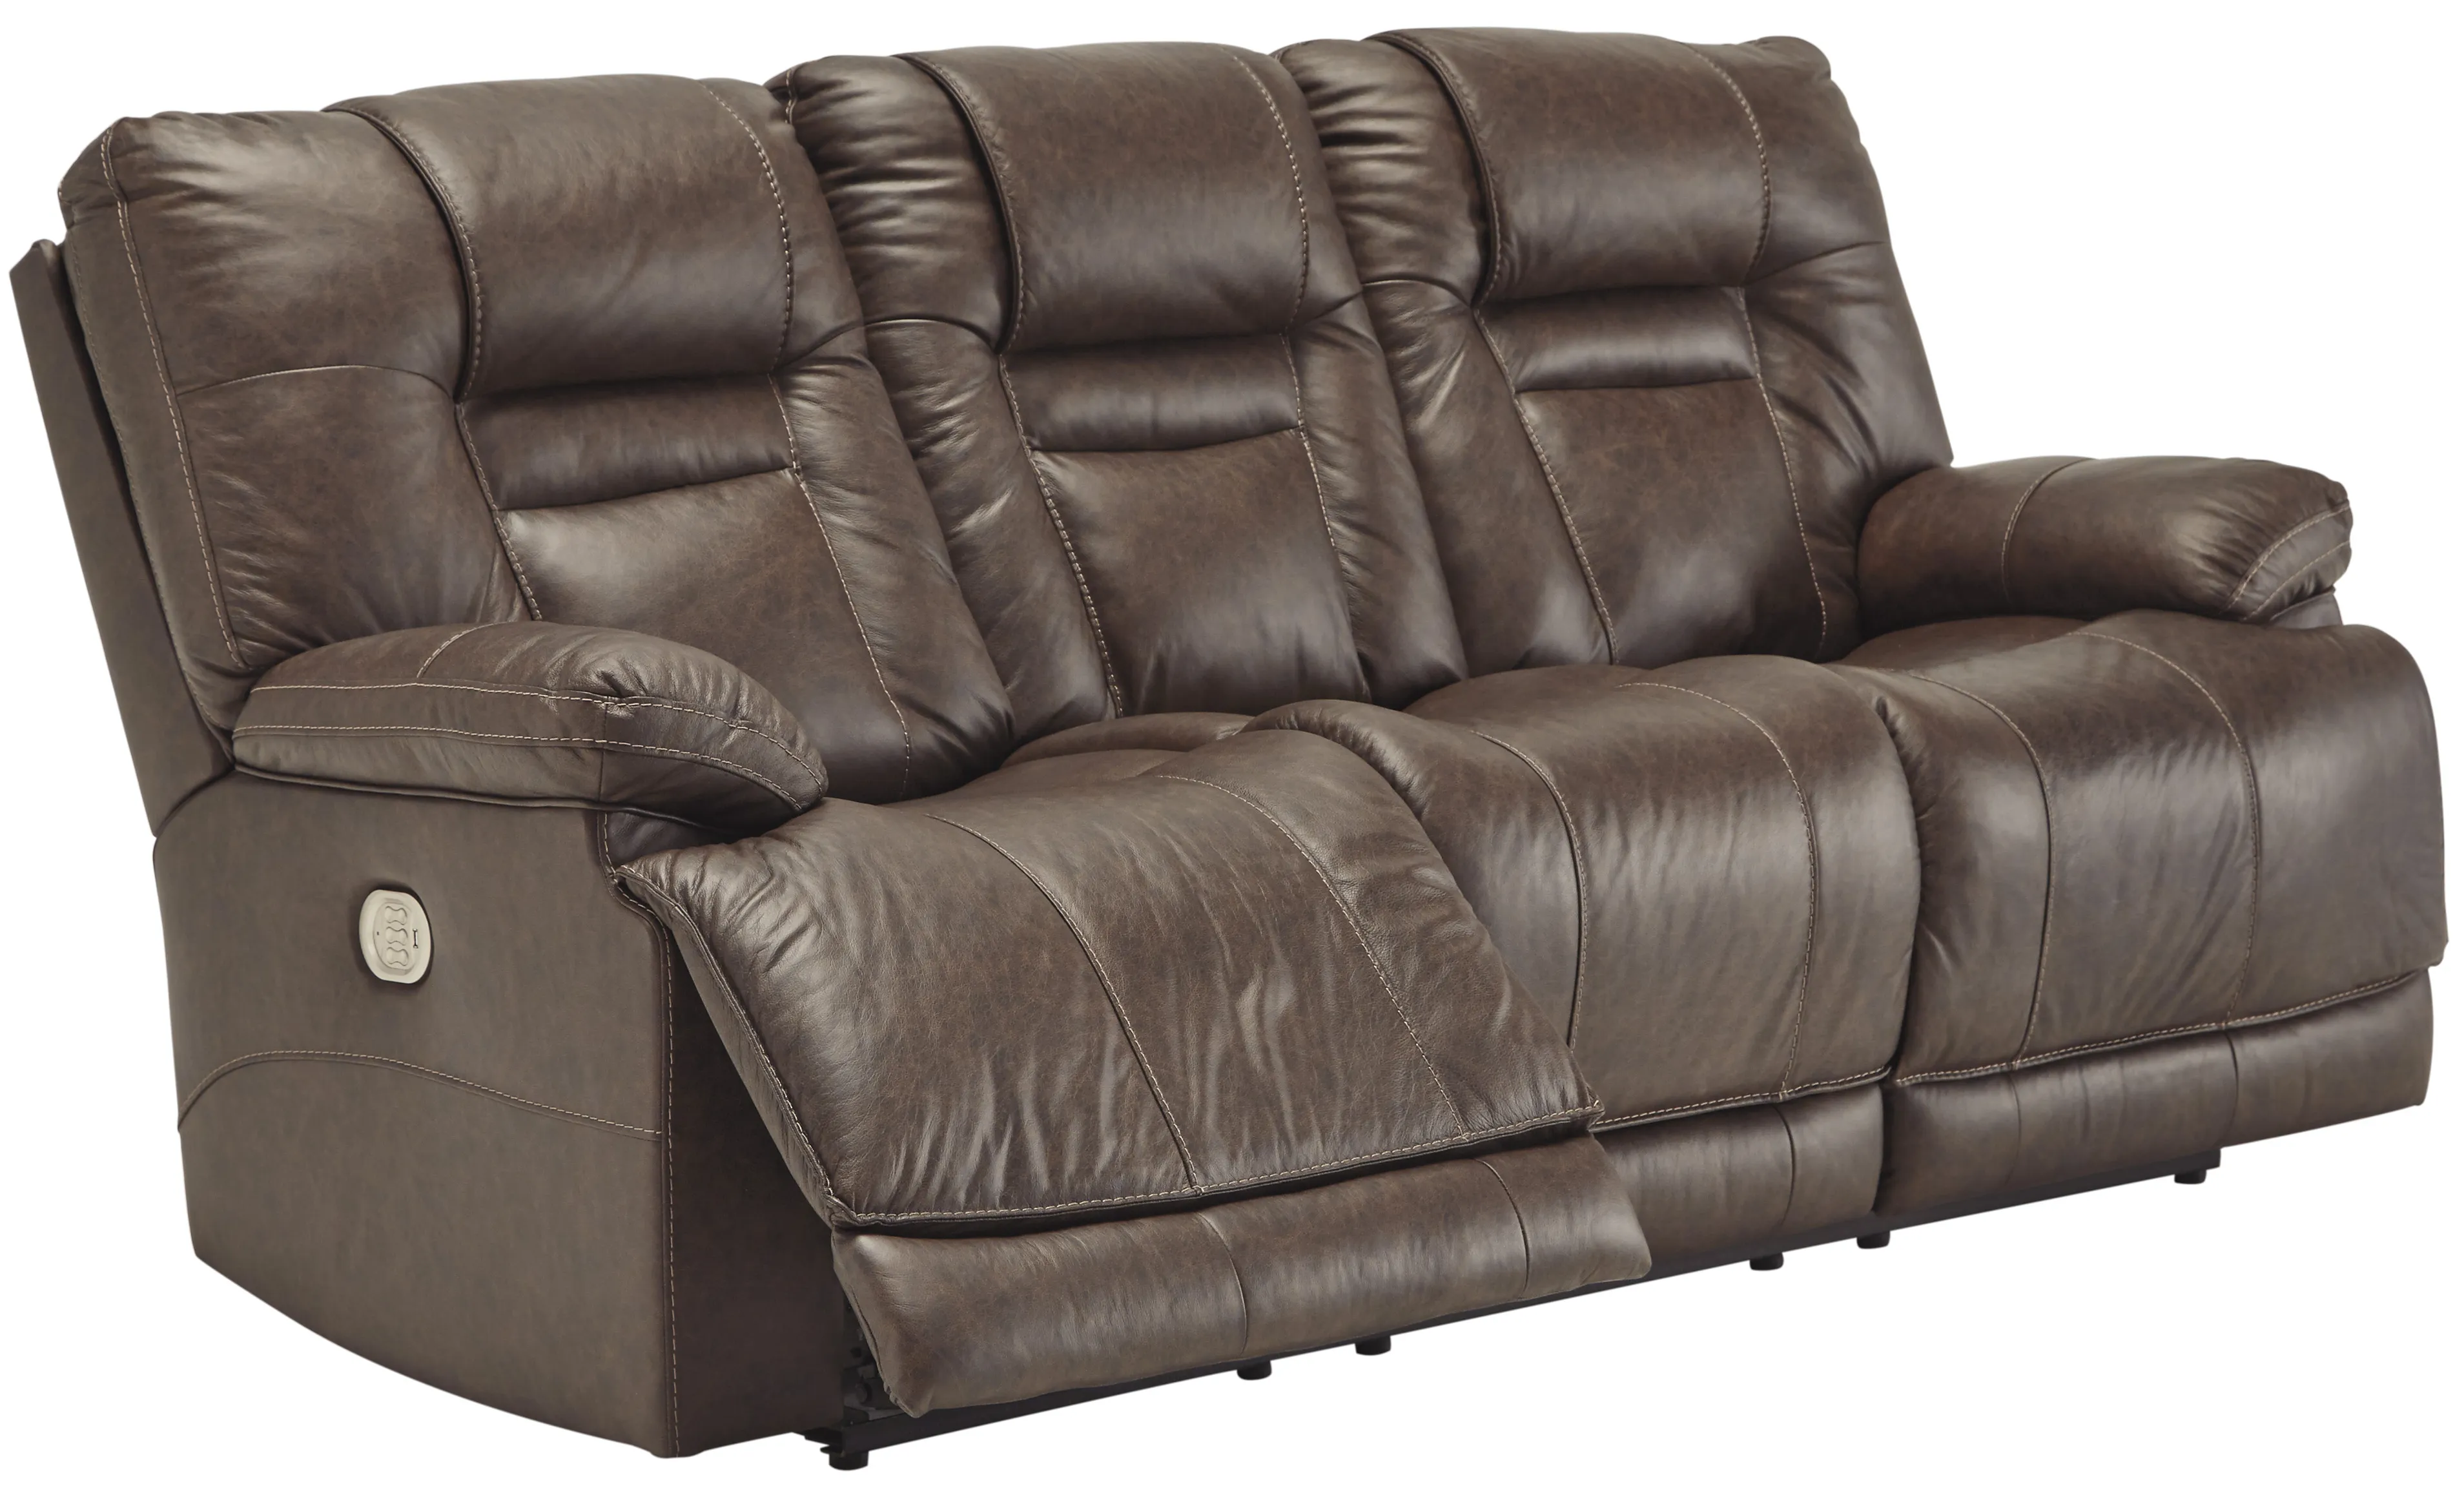 Signature Design by Ashley® Wurstrow Umber Power Reclining Sofa with Adjustable Headrest